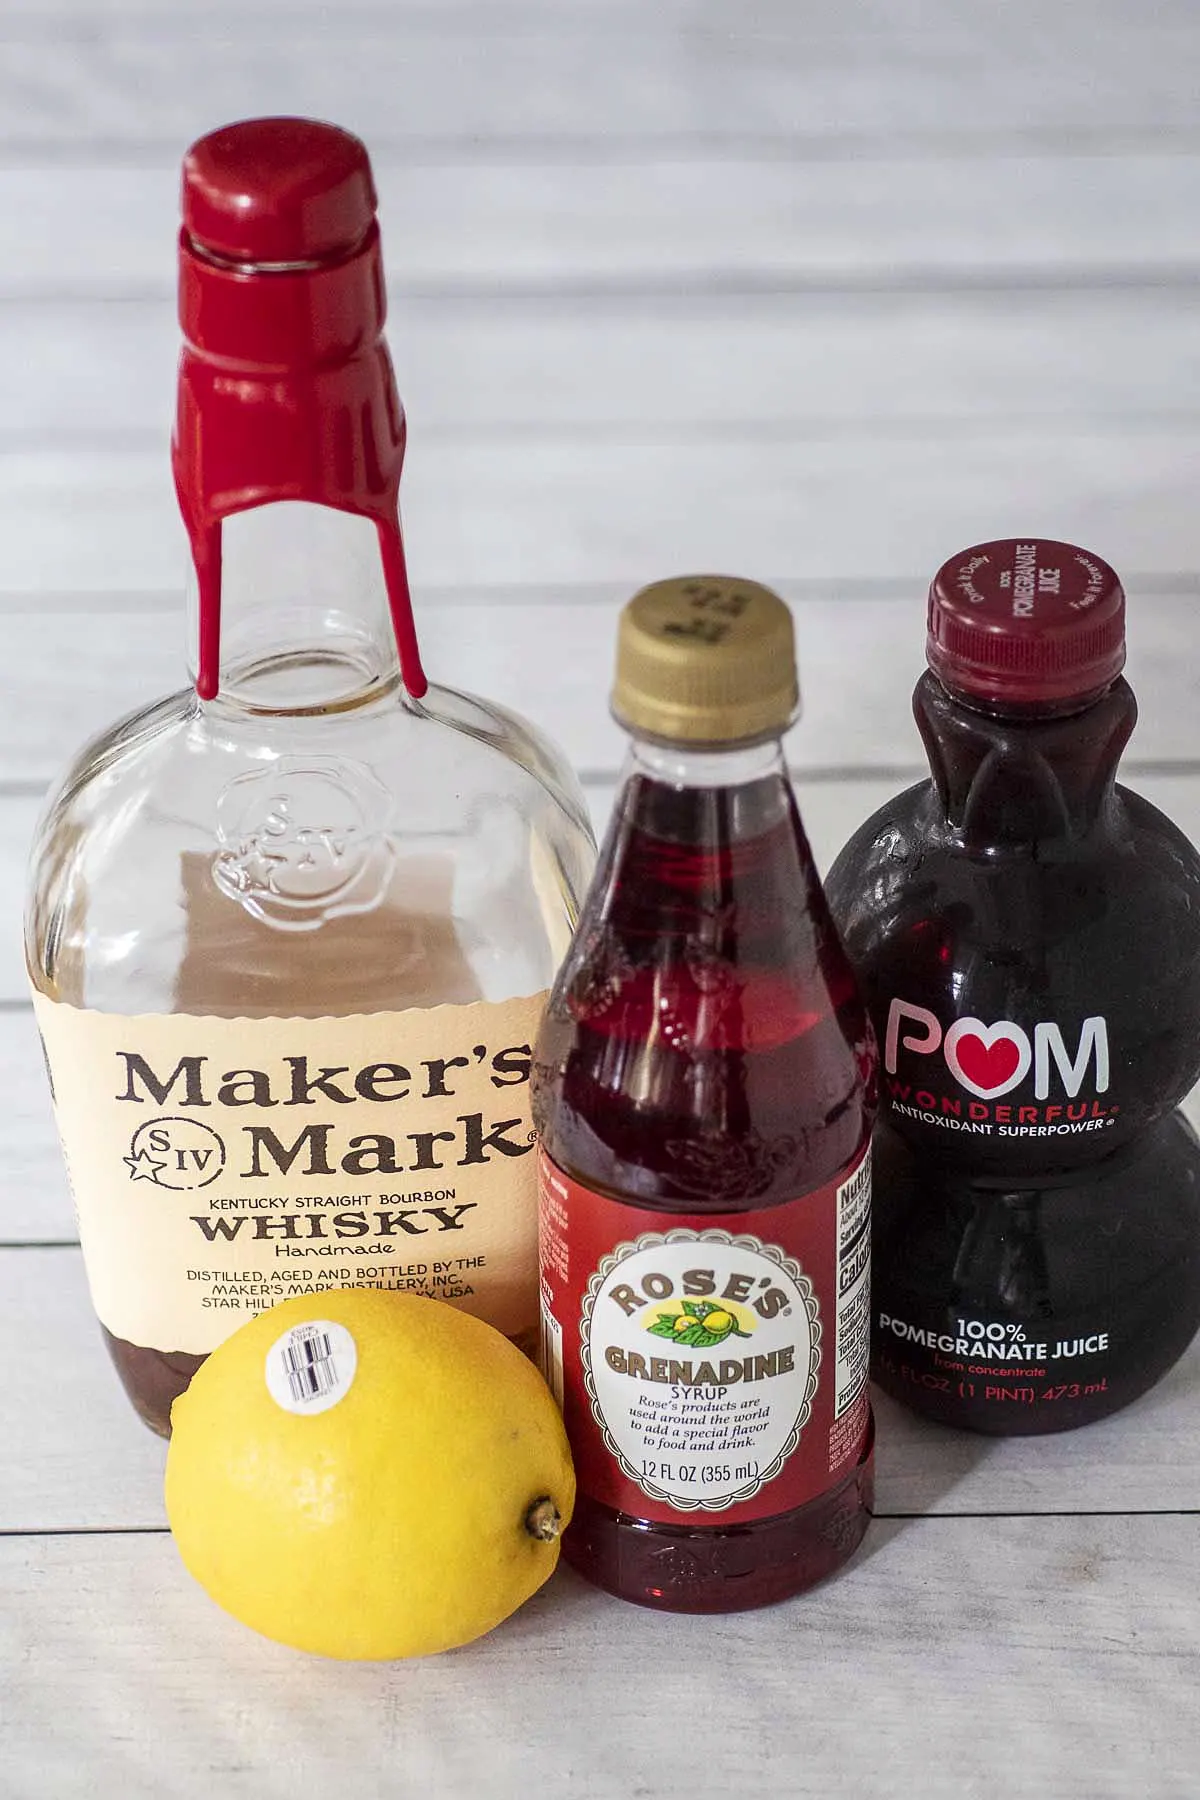 Ingredients for a witches' brew whiskey sour: whiskey, lemon, grenadine and pomegranate juice.